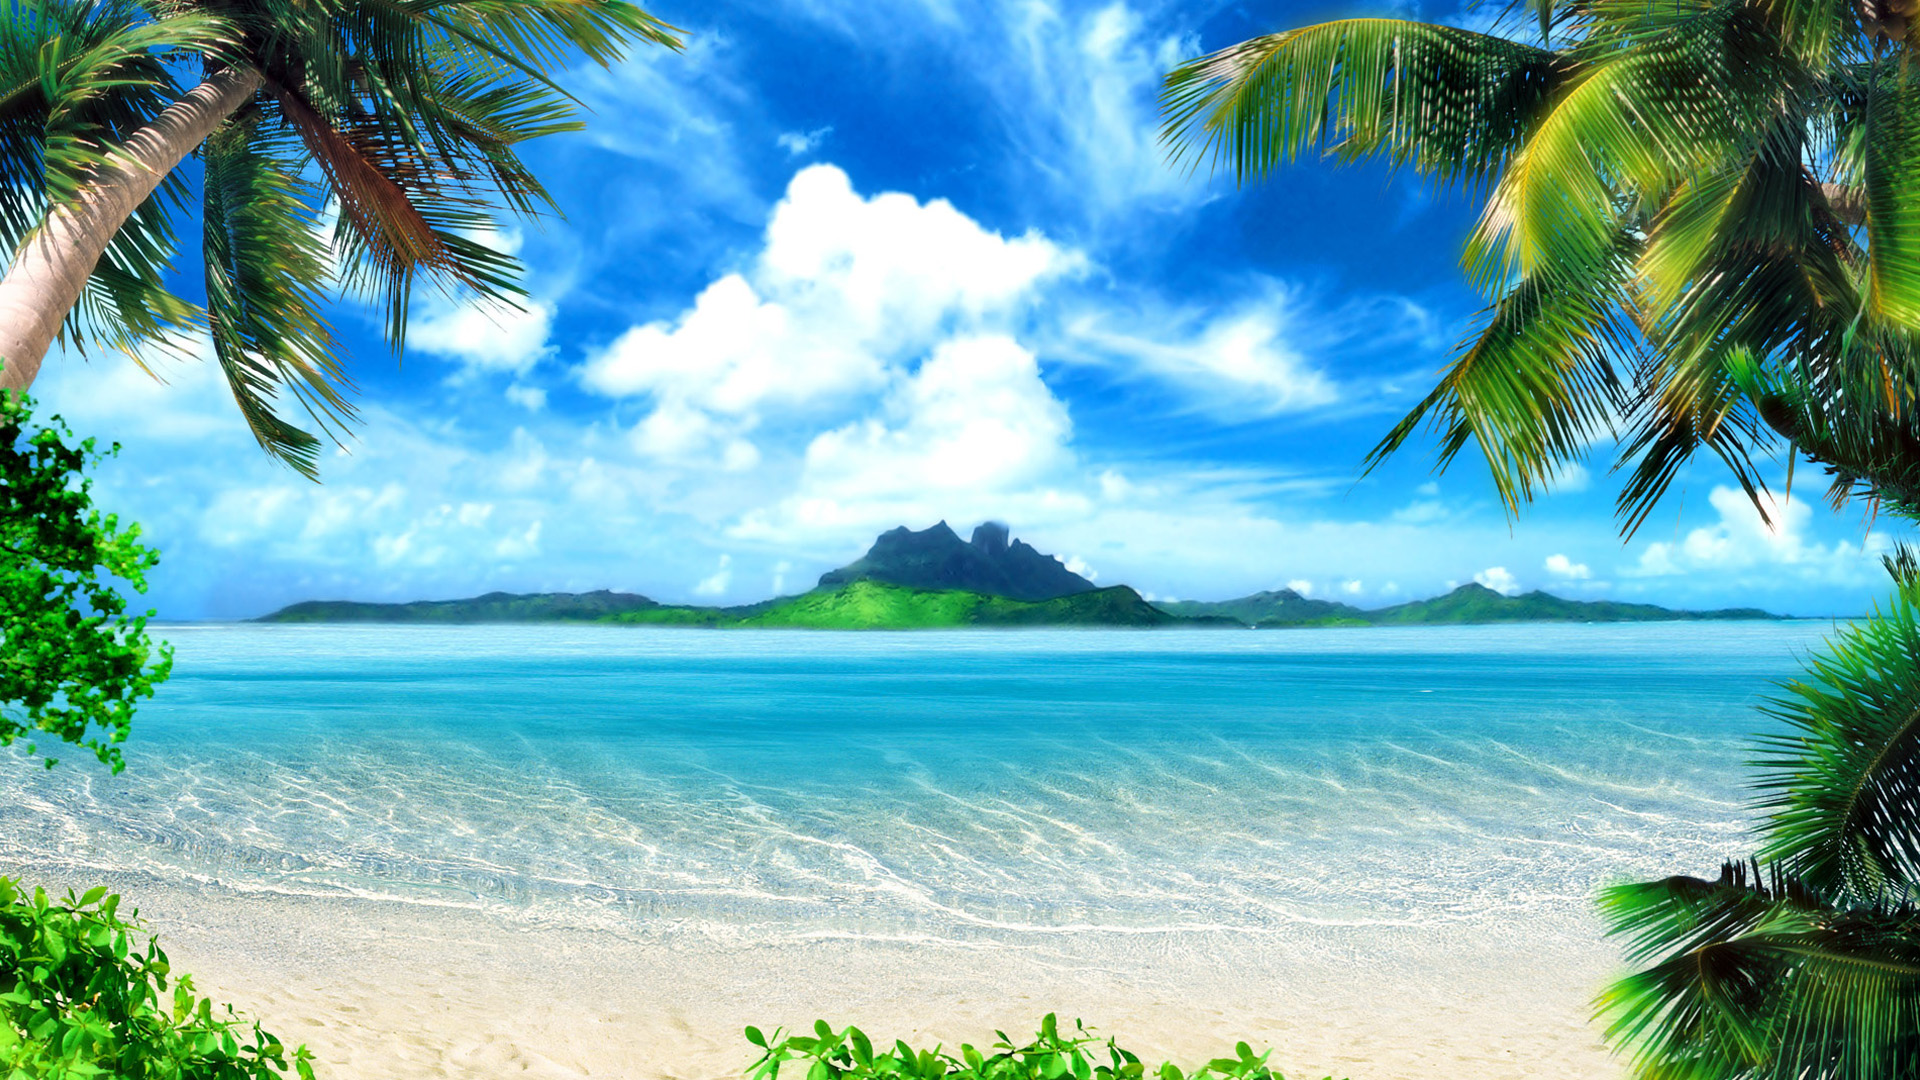 The Best Beach Scenery Wallpaper Pictures And Image